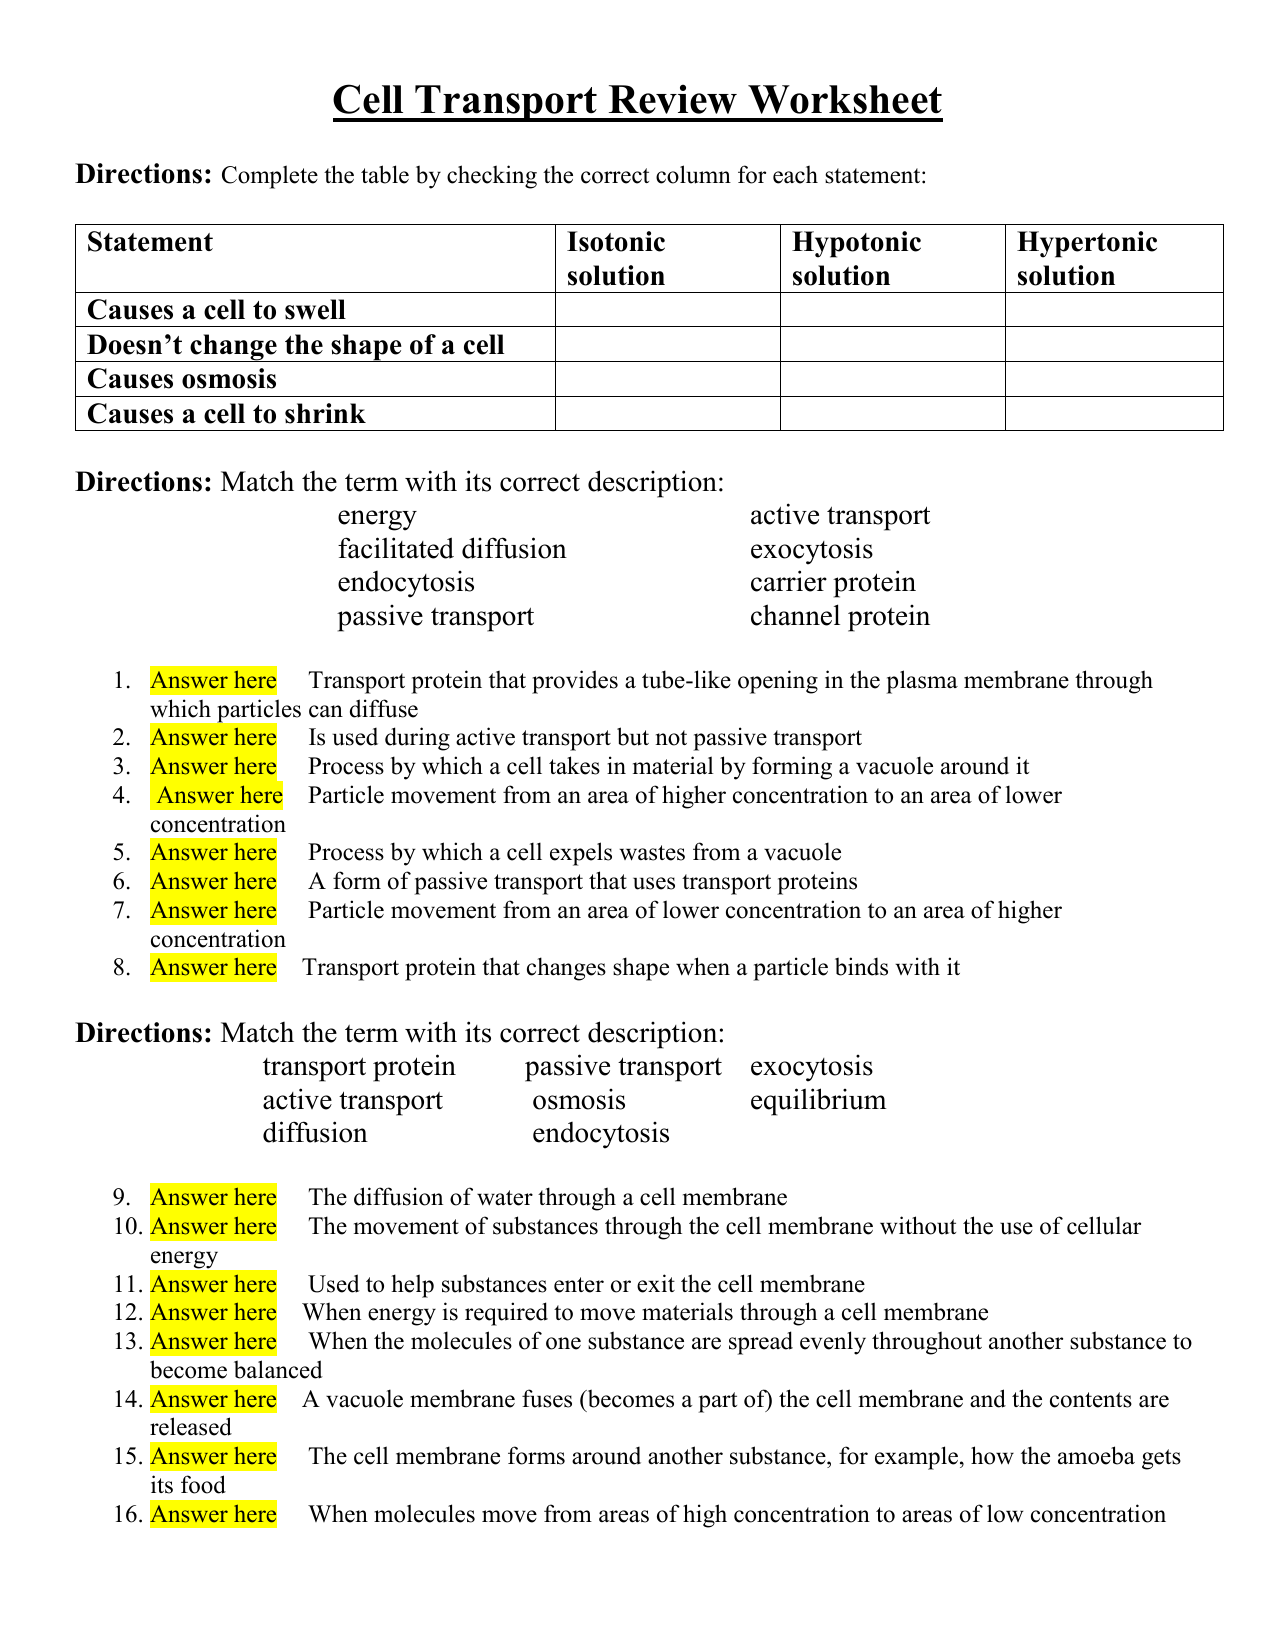 Noah Loya - Cell Transport & Review Worksheet With Cellular Transport Worksheet Answers